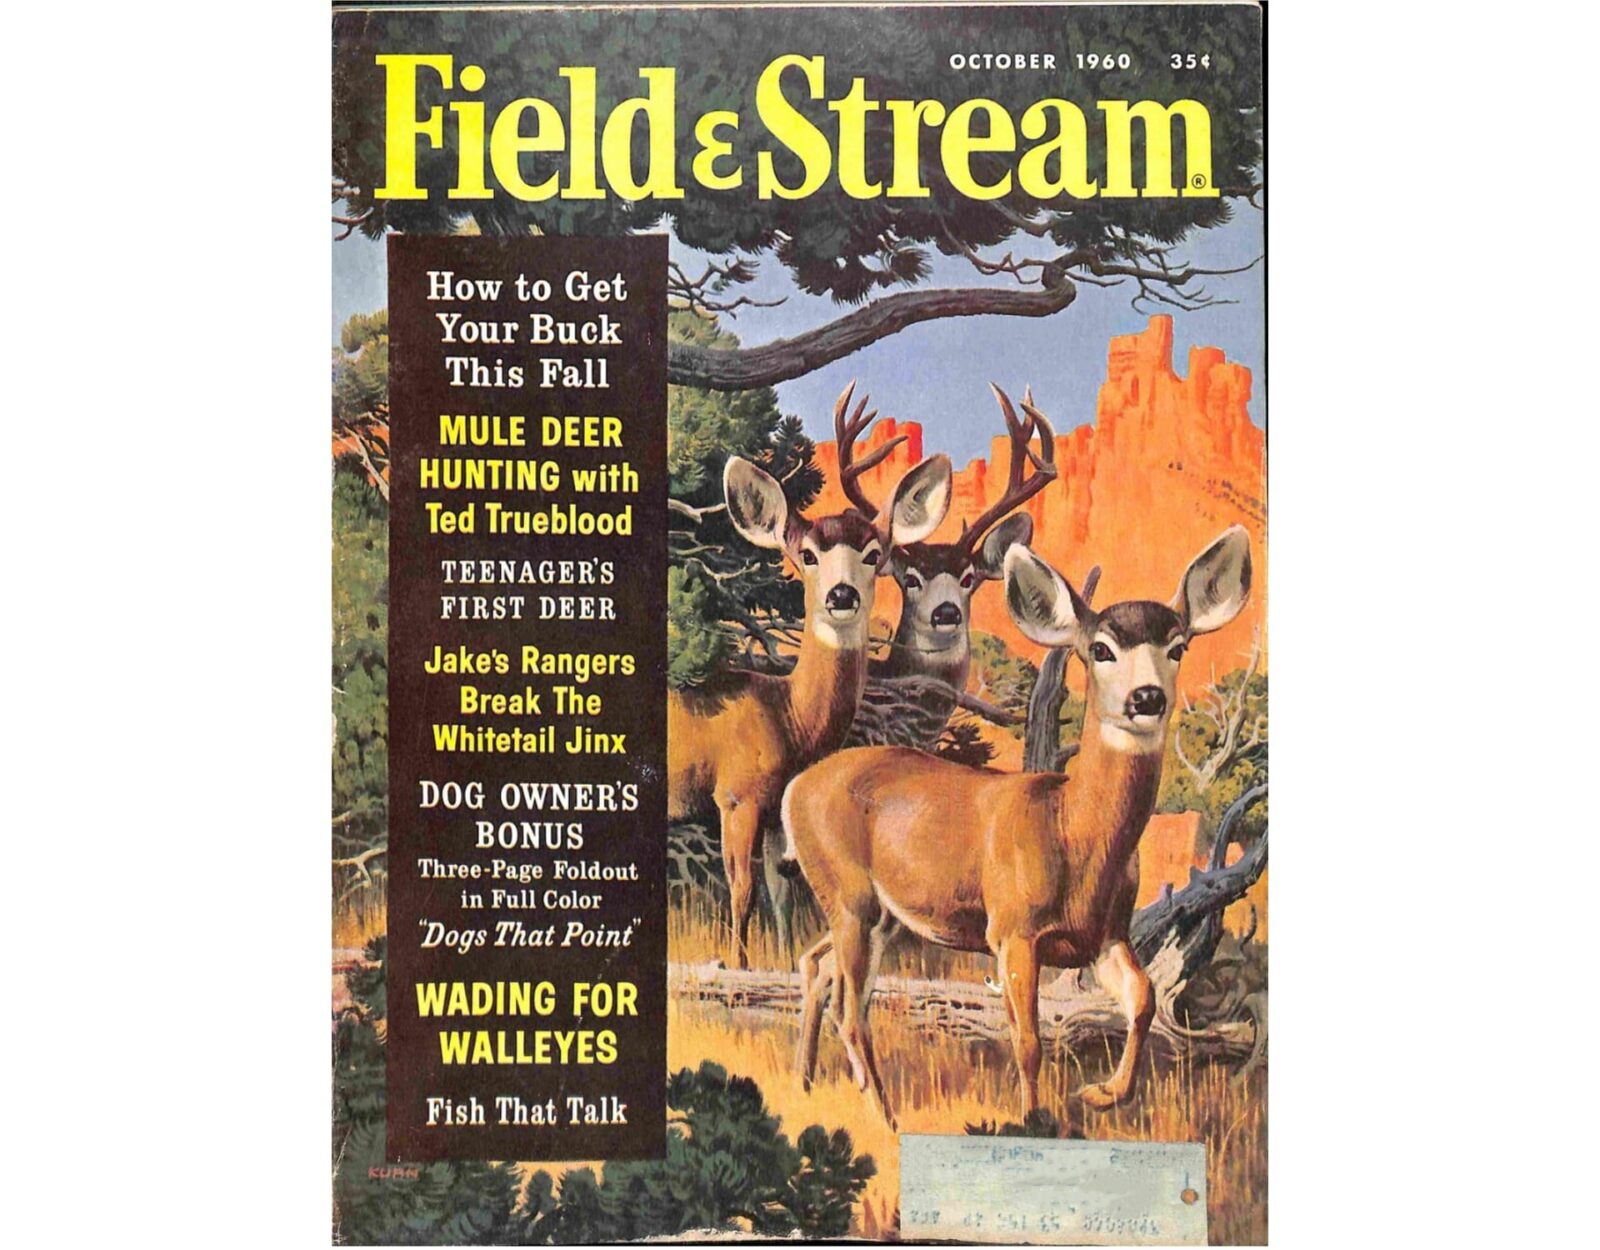 Field and stream cover from 1960 with an artistic drawing of 3 deer in a forested area